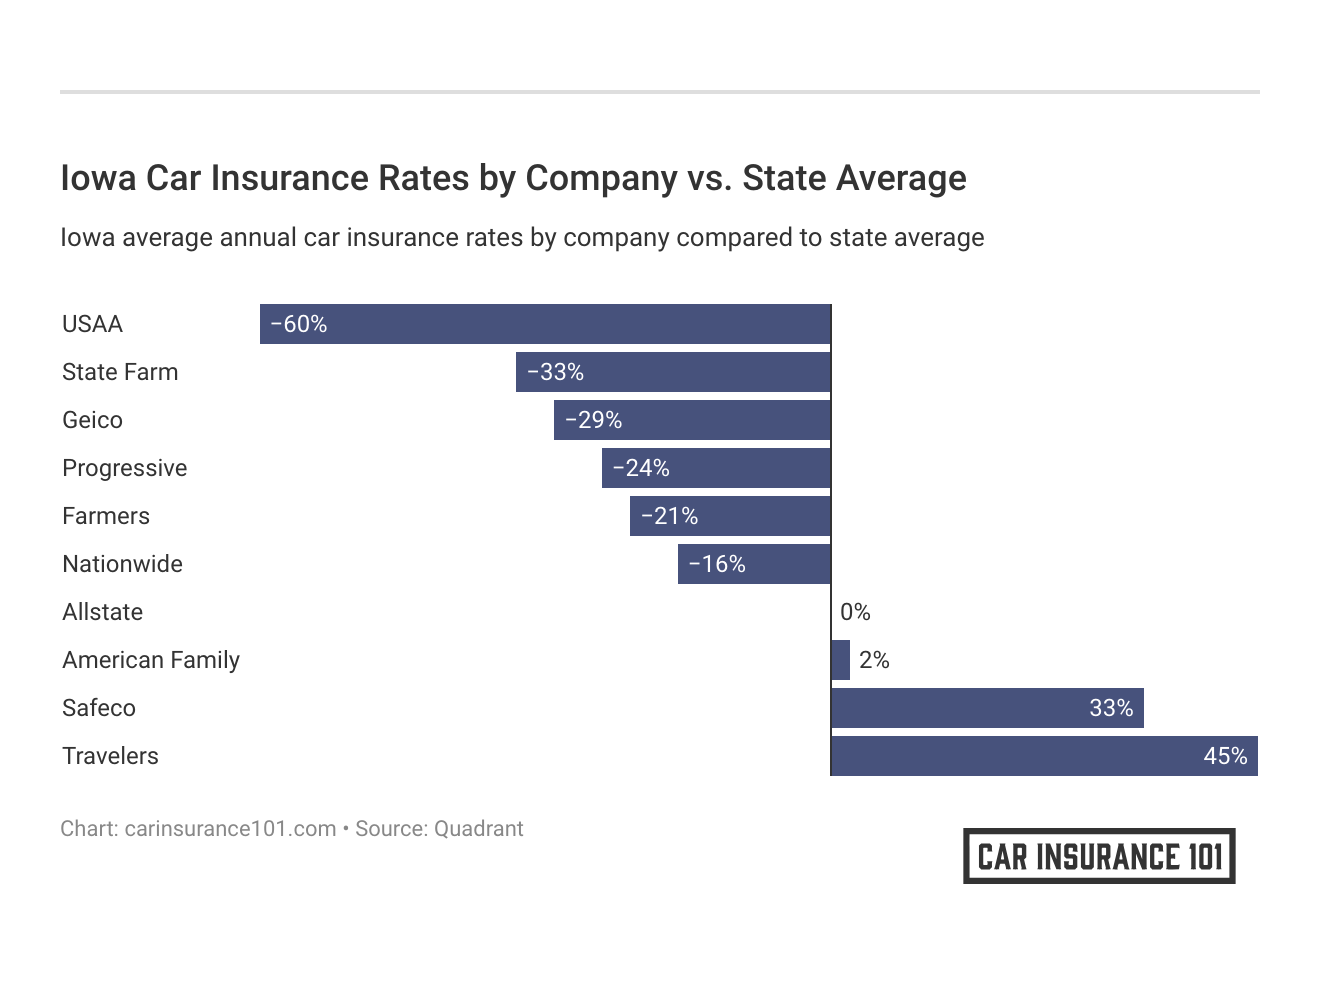 <h3>Iowa Car Insurance Rates by Company vs. State Average</h3>